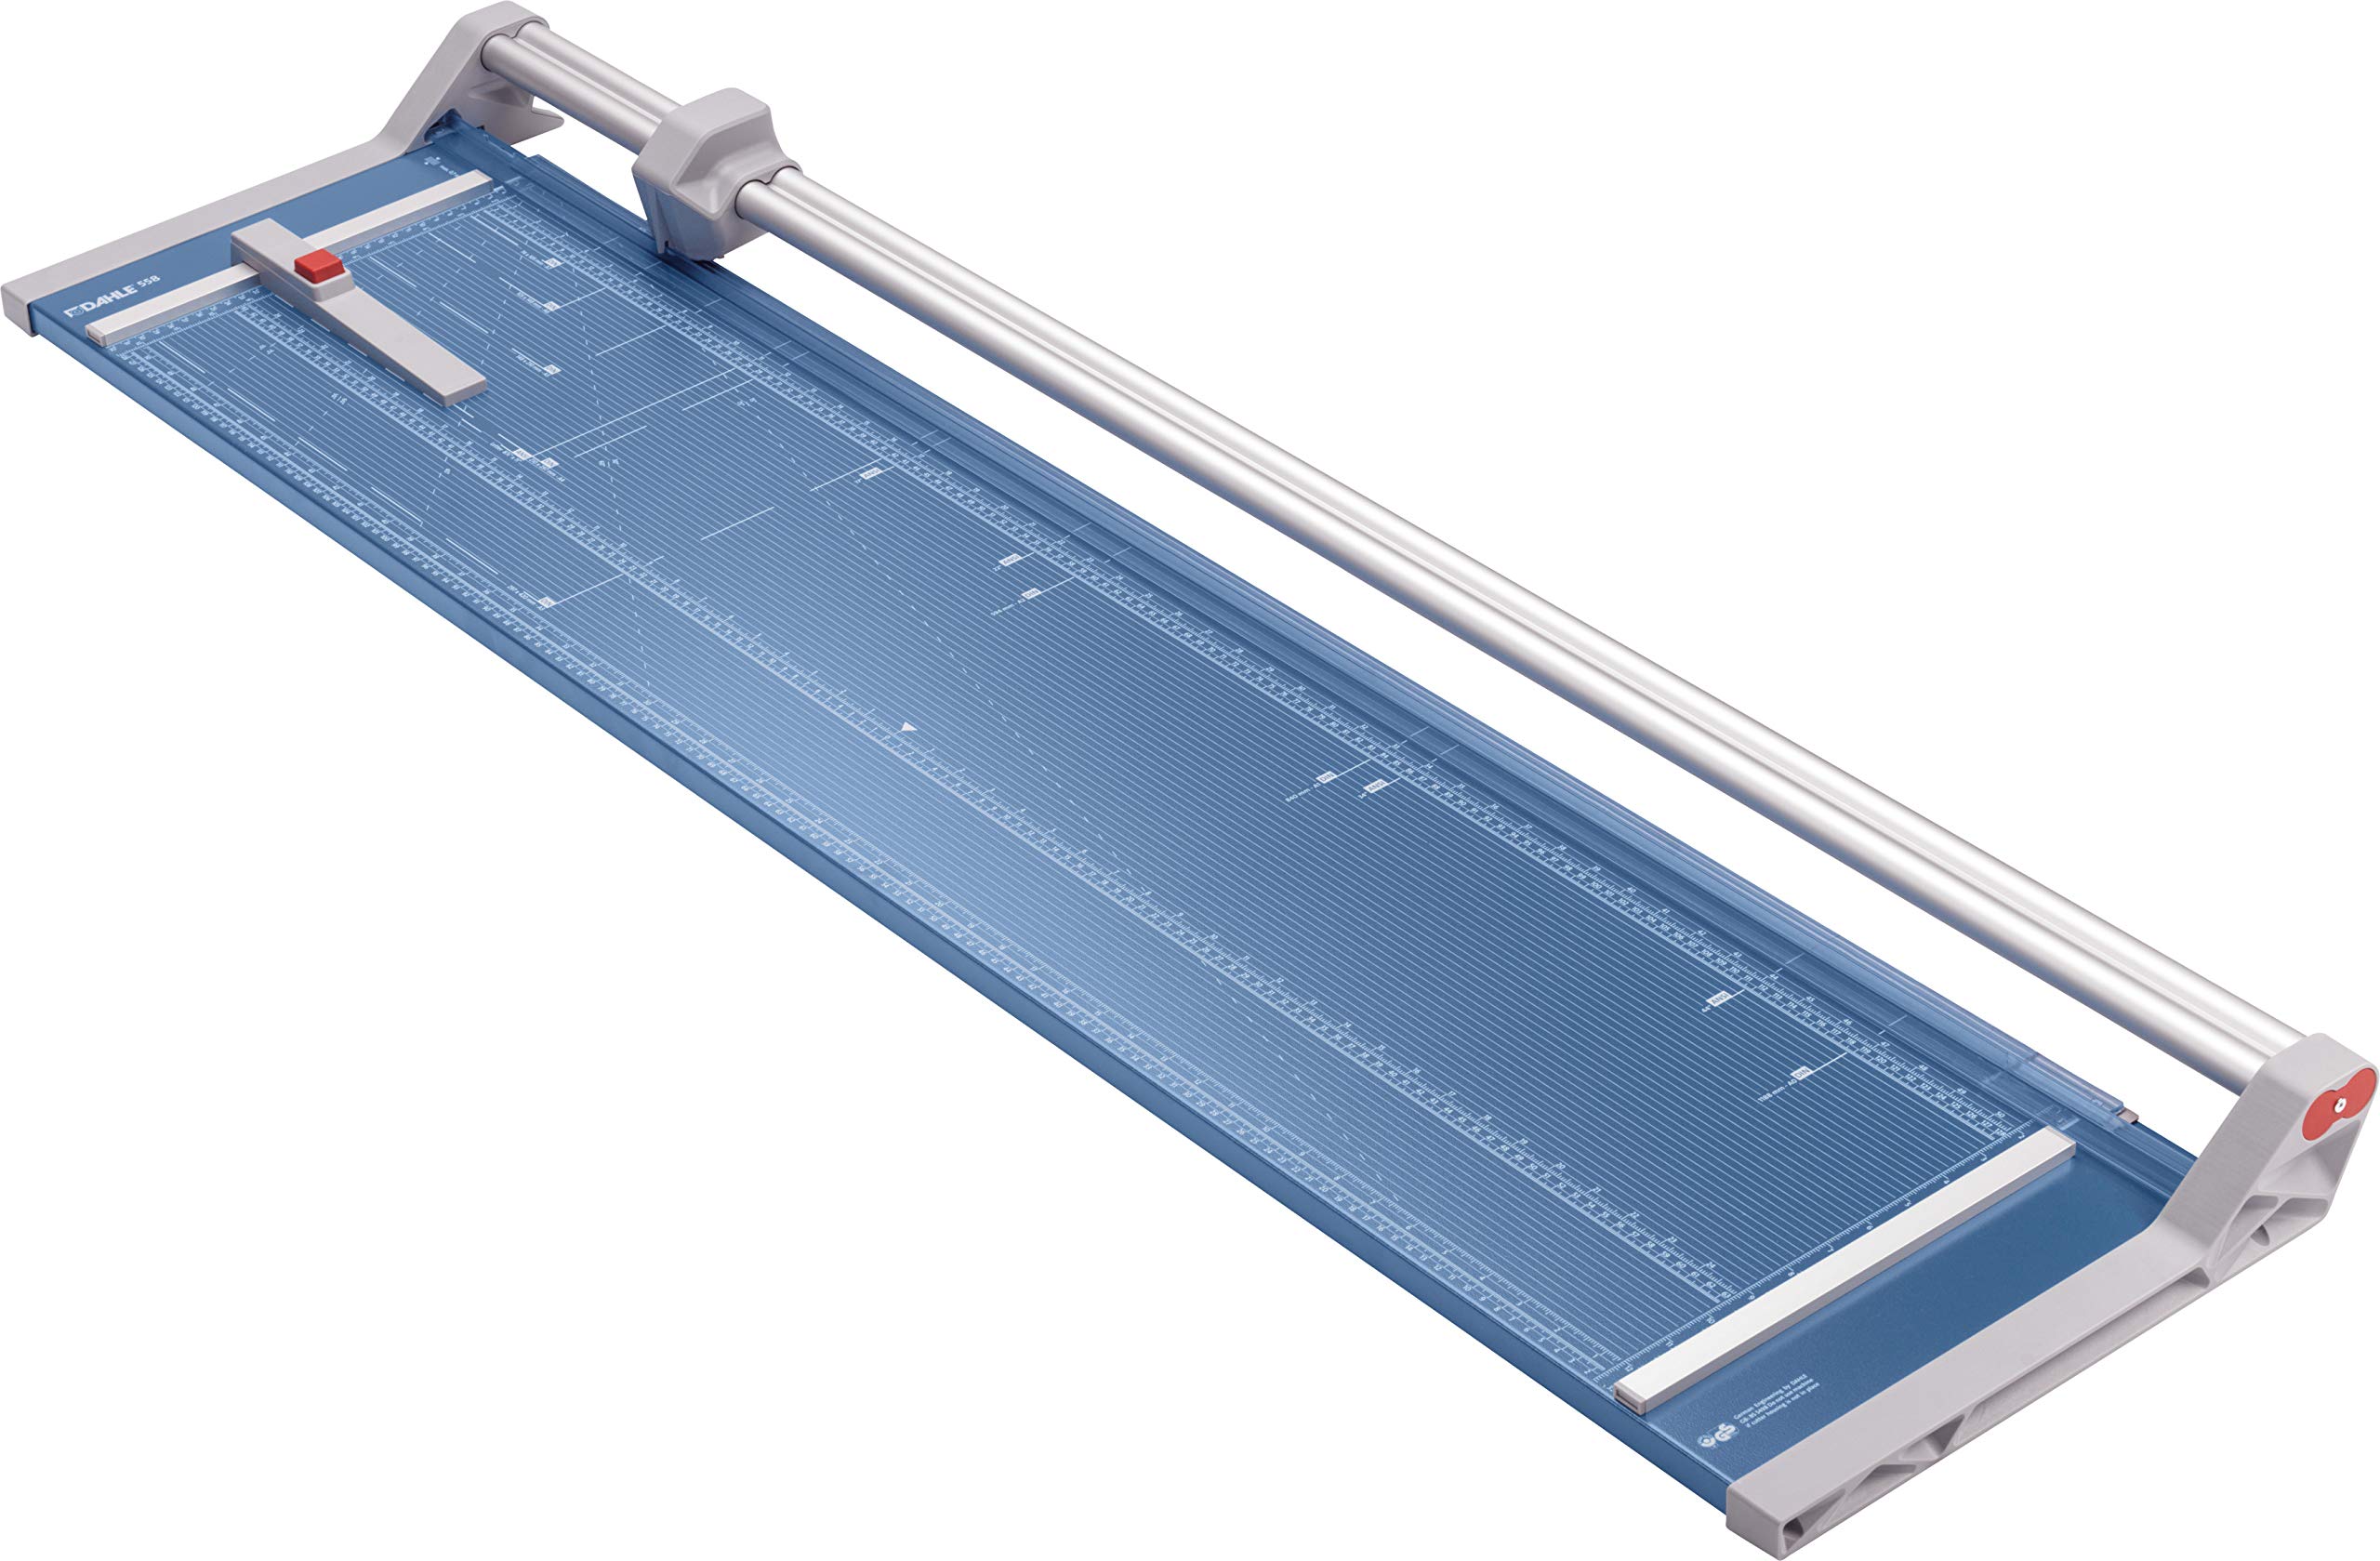 Dahle 558 Professional Rotary Trimmer, 51 cut Length, 12 Sheet capacity, Self-Sharpening, Dual guide Bar, Automatic clamp, germa